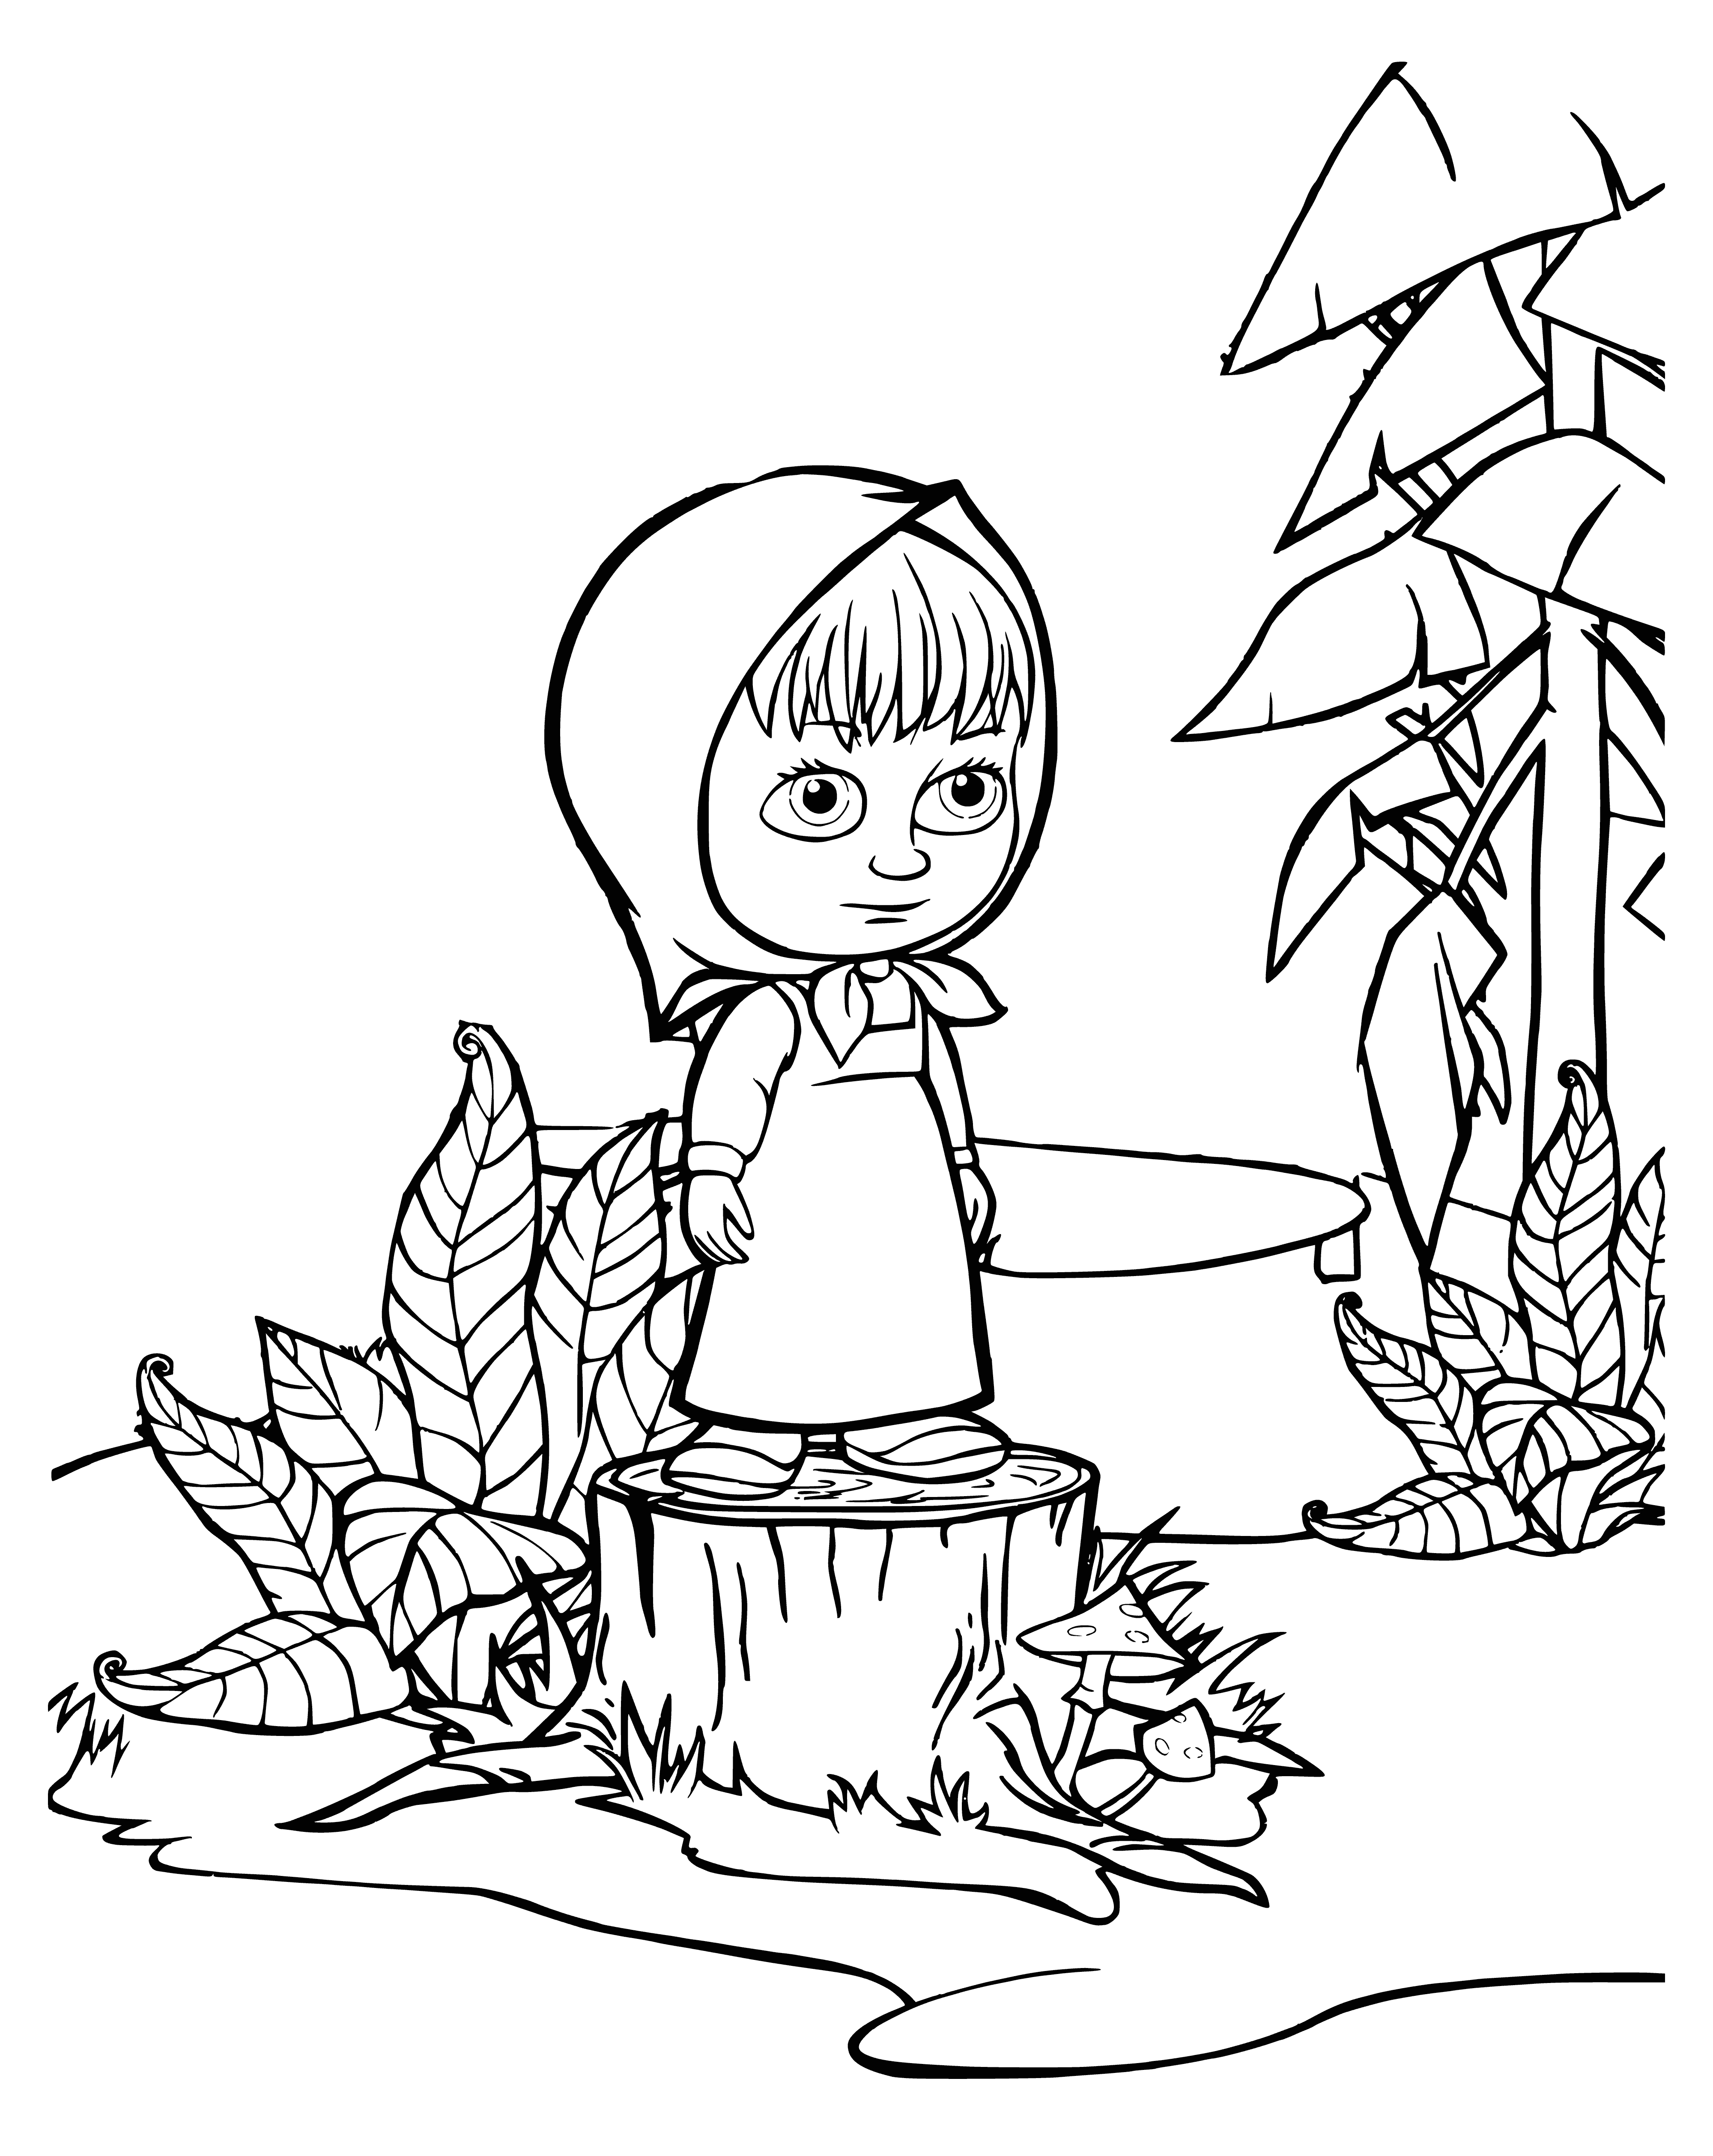 coloring page: Masha looks sadly up at bear standing on stump, arms outstretched. Bear looks down at her.